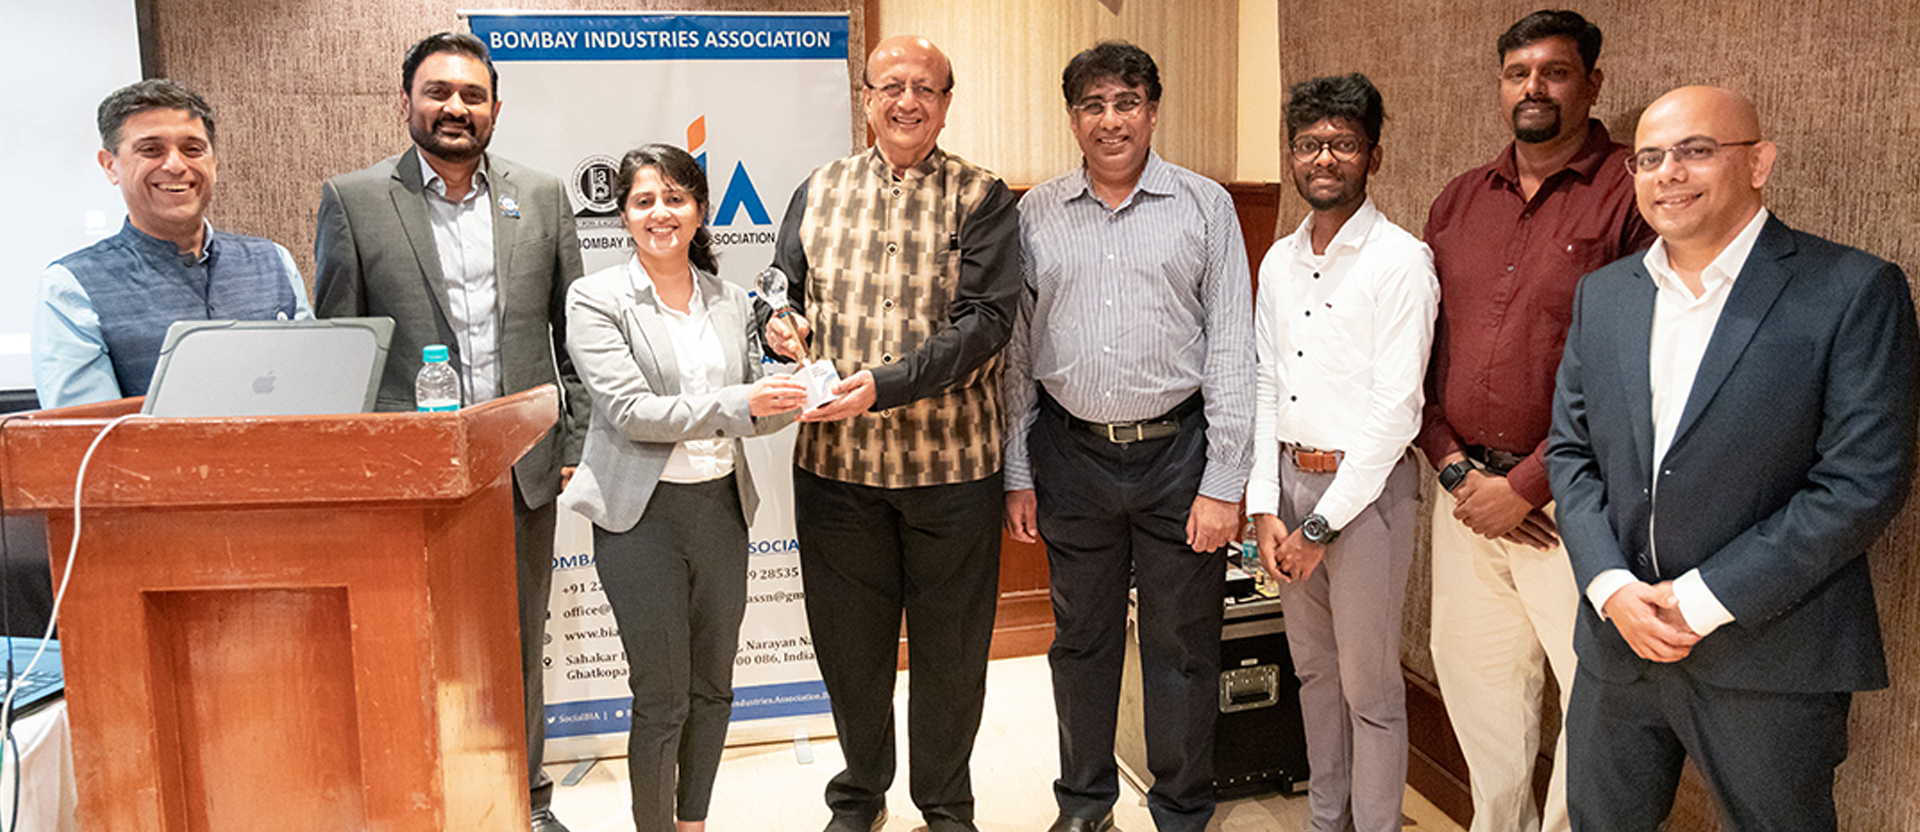 Mr. Nevil Sanghvi with his team at the (Niharika Kolte) drone session organised by Bombay Industries Association BIA